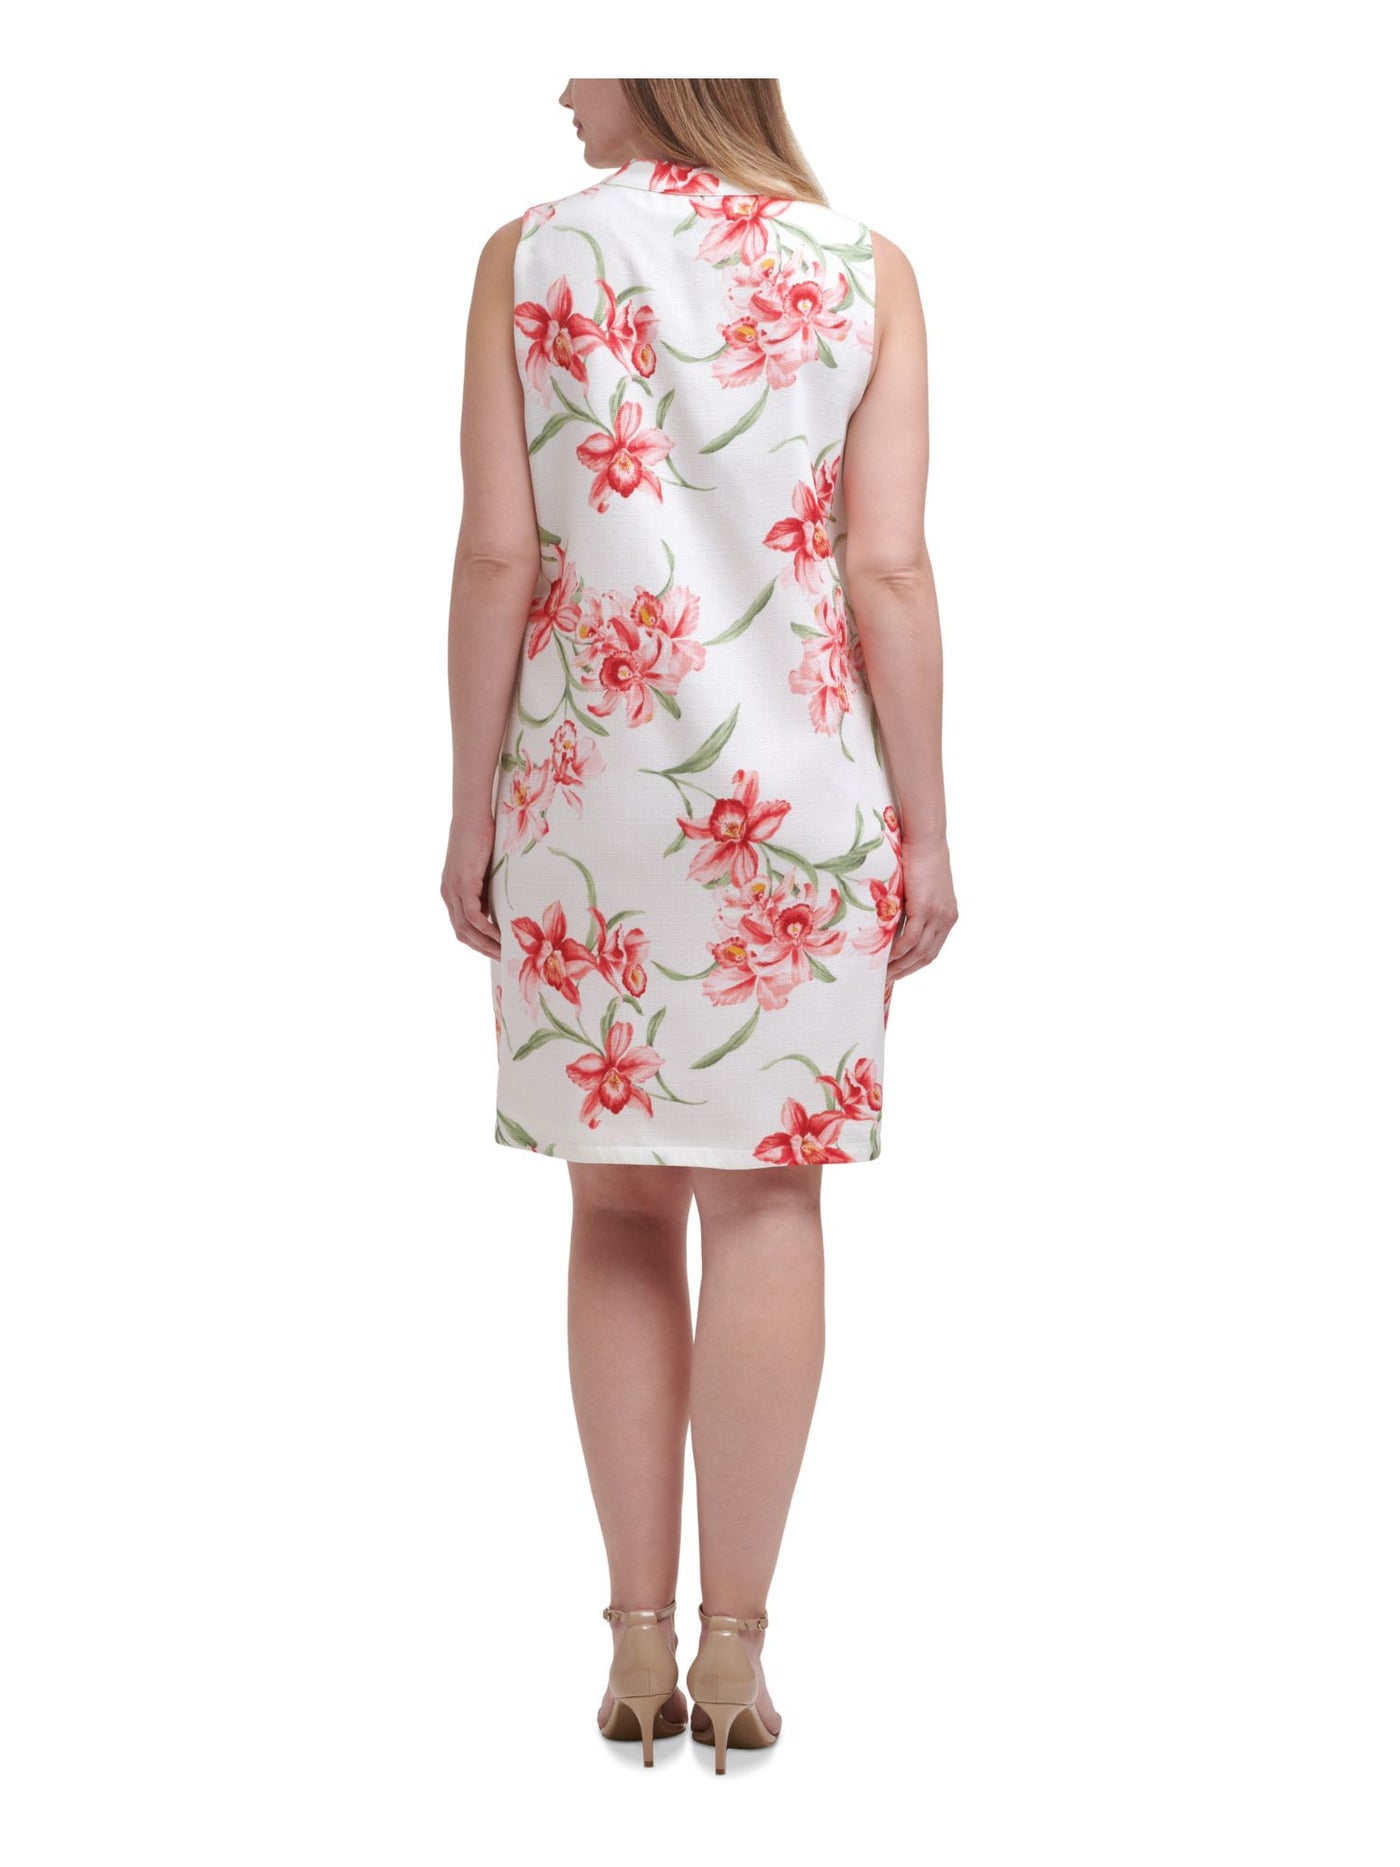 JESSICA HOWARD Womens White Floral Sleeveless Split Above The Knee Party Shift Dress Plus 24W